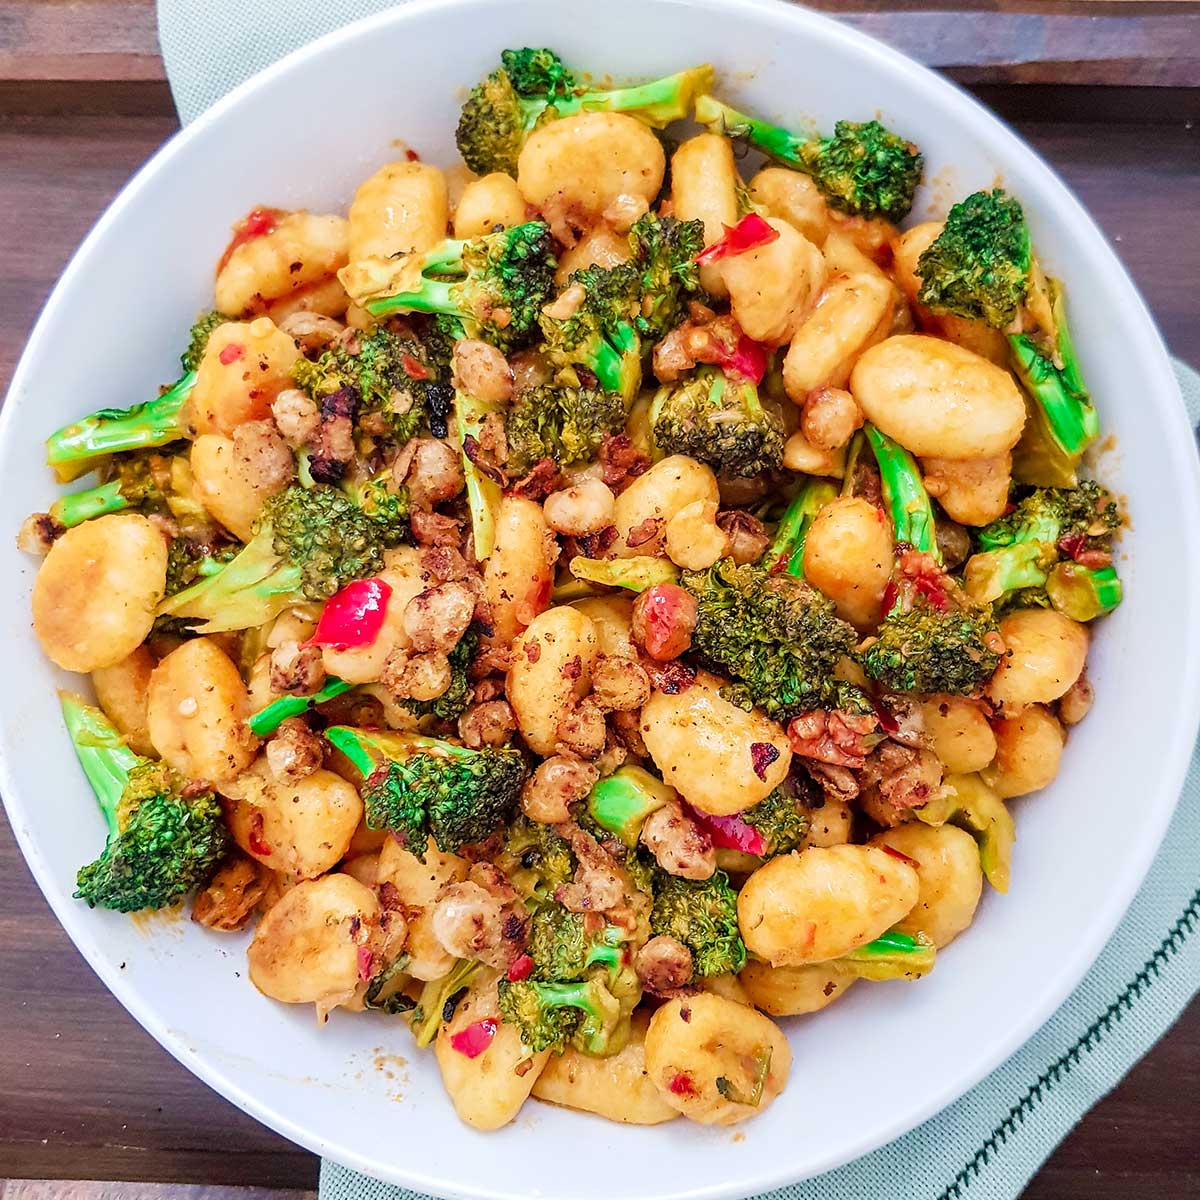 pan fried gnocchi with broccoli served in a bowl